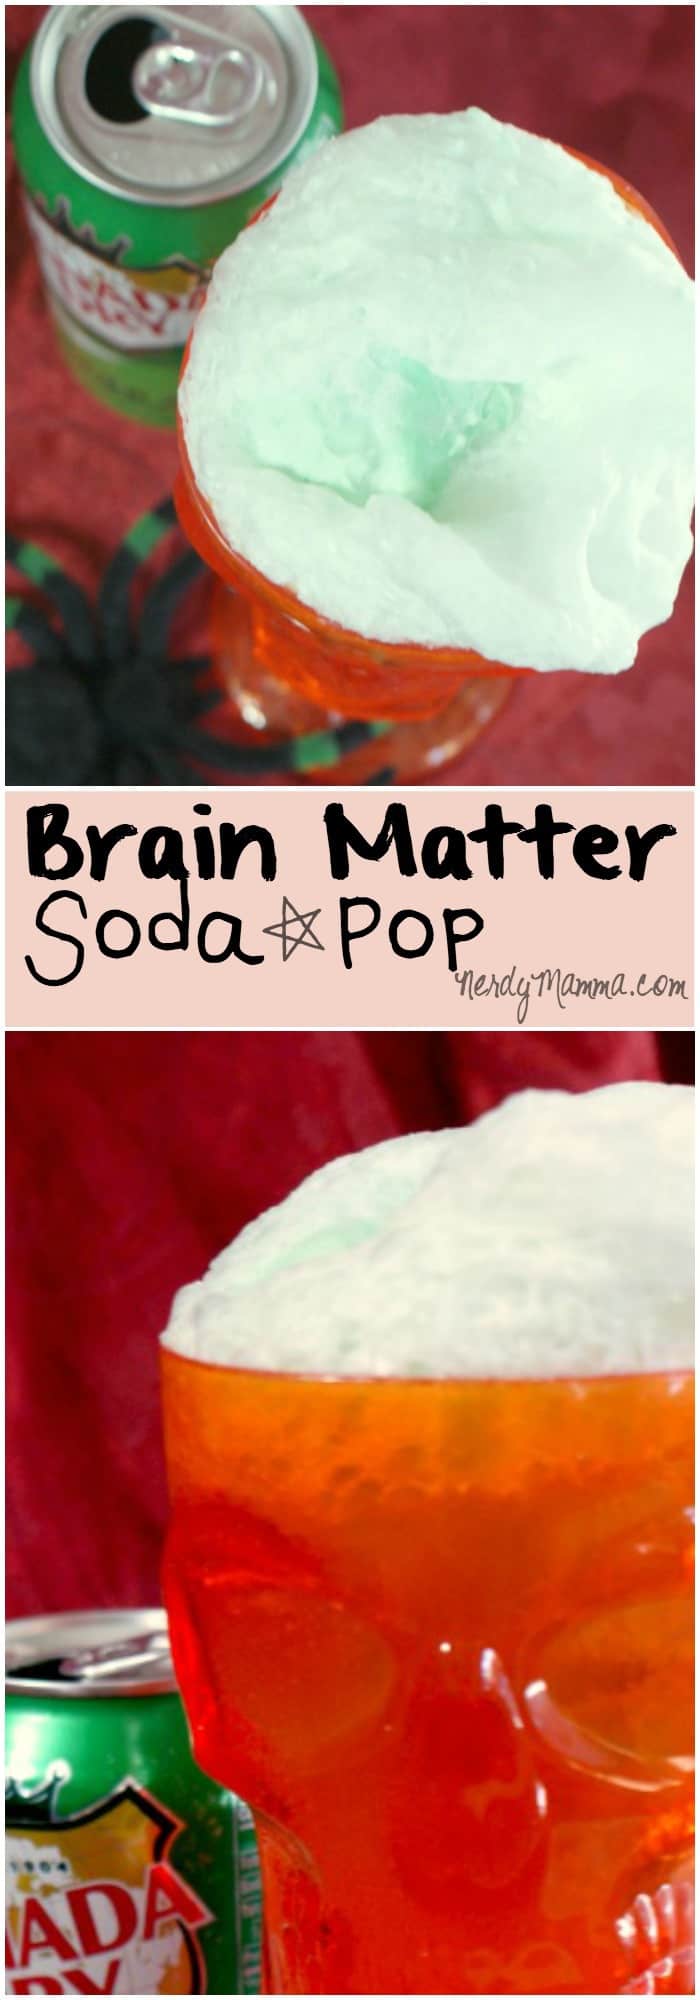 The kids at my son's halloween party are going to love this brain matter soda pop. The best part egg-free and dairy-free, so I don't have to worry about any allergy kids getting any!